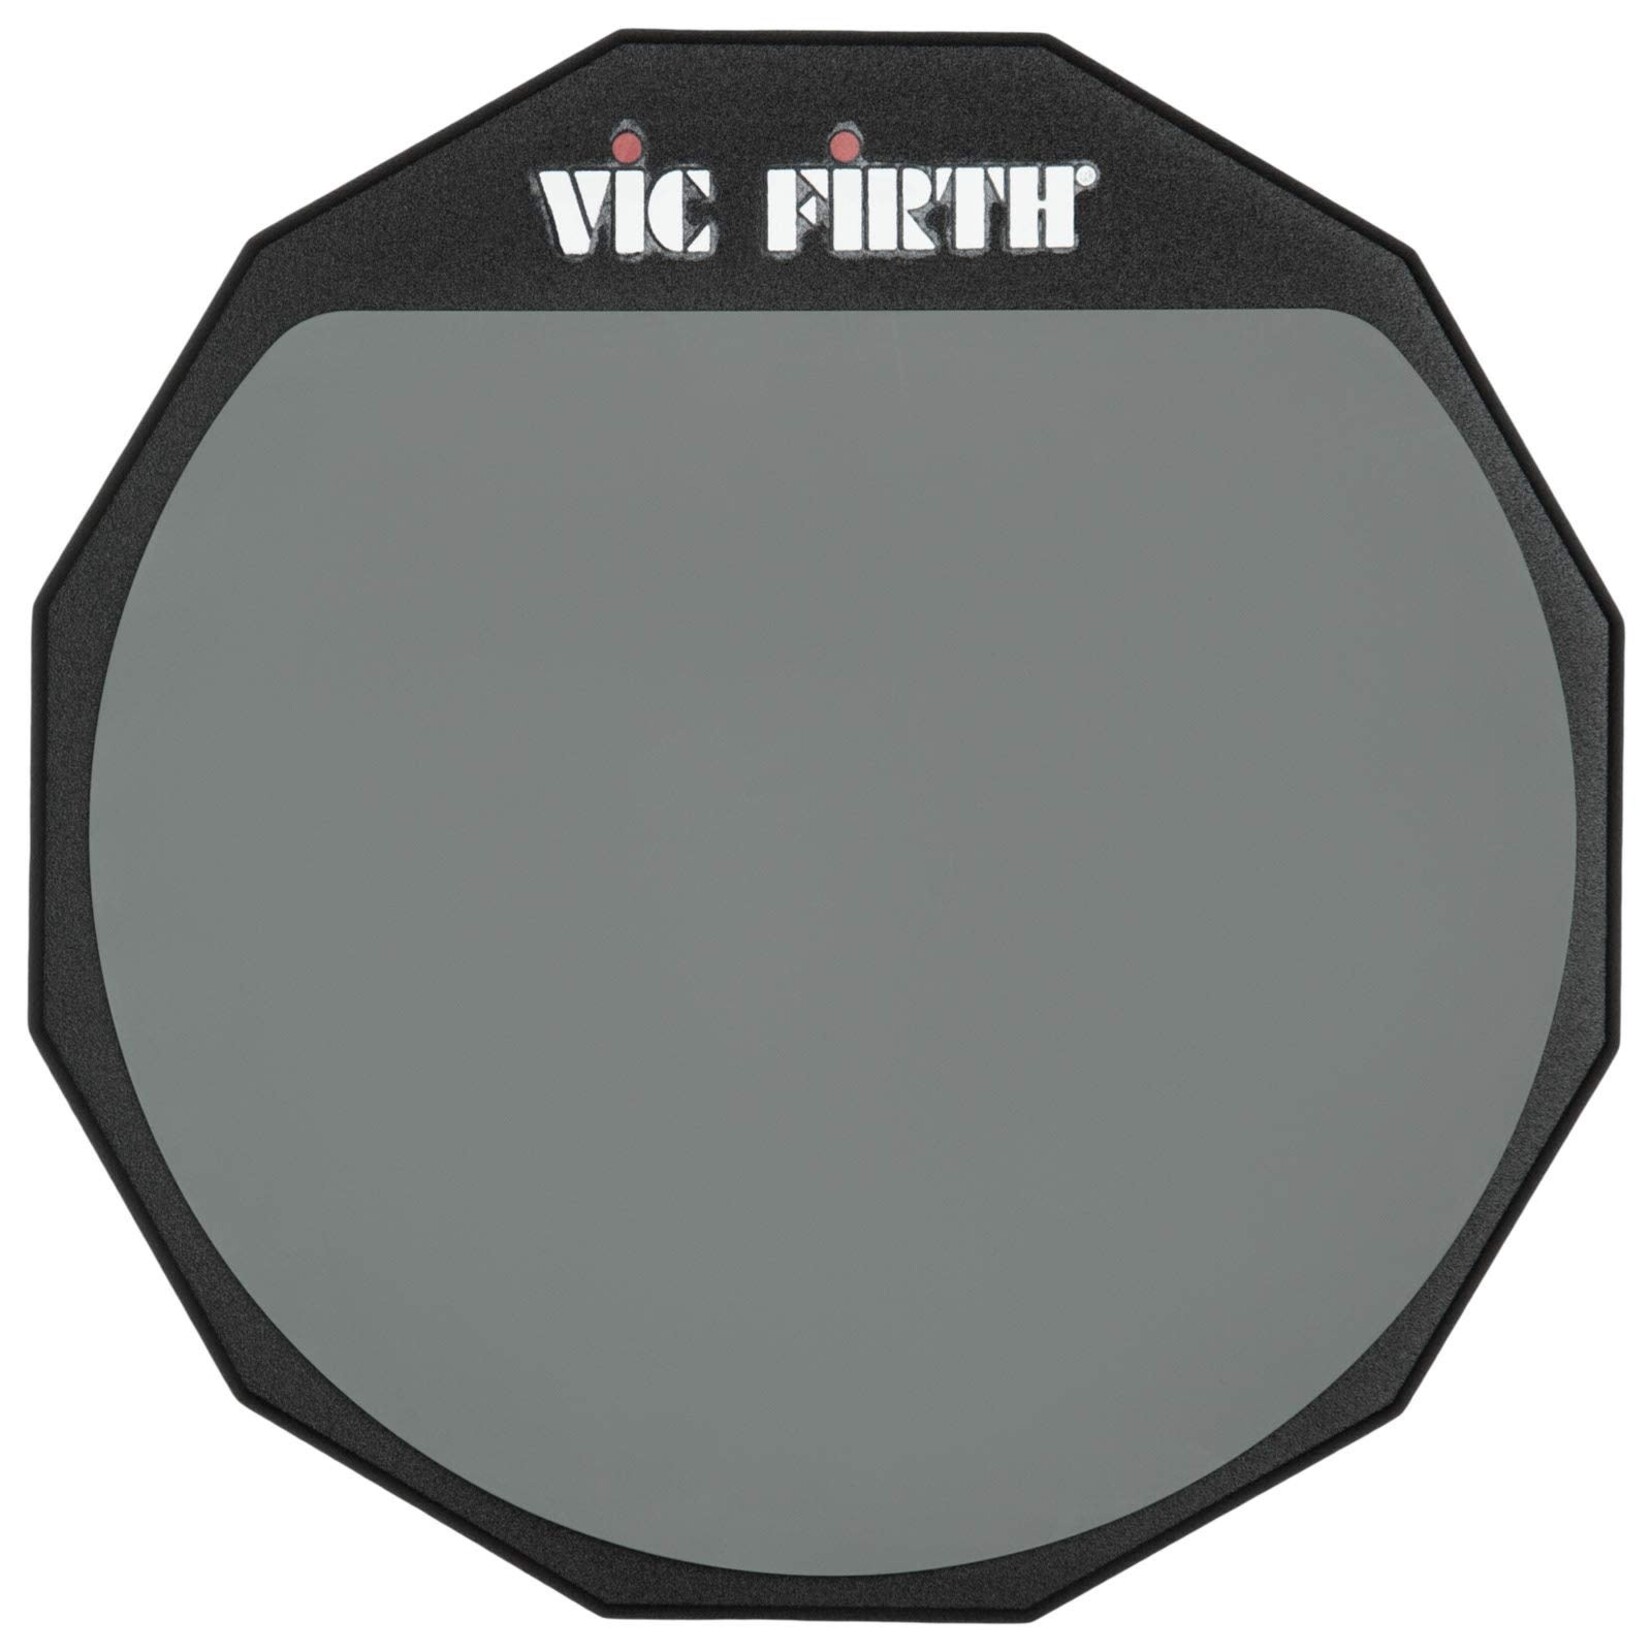 Vic Firth Vic Firth 12" Single Sided Practice Pad